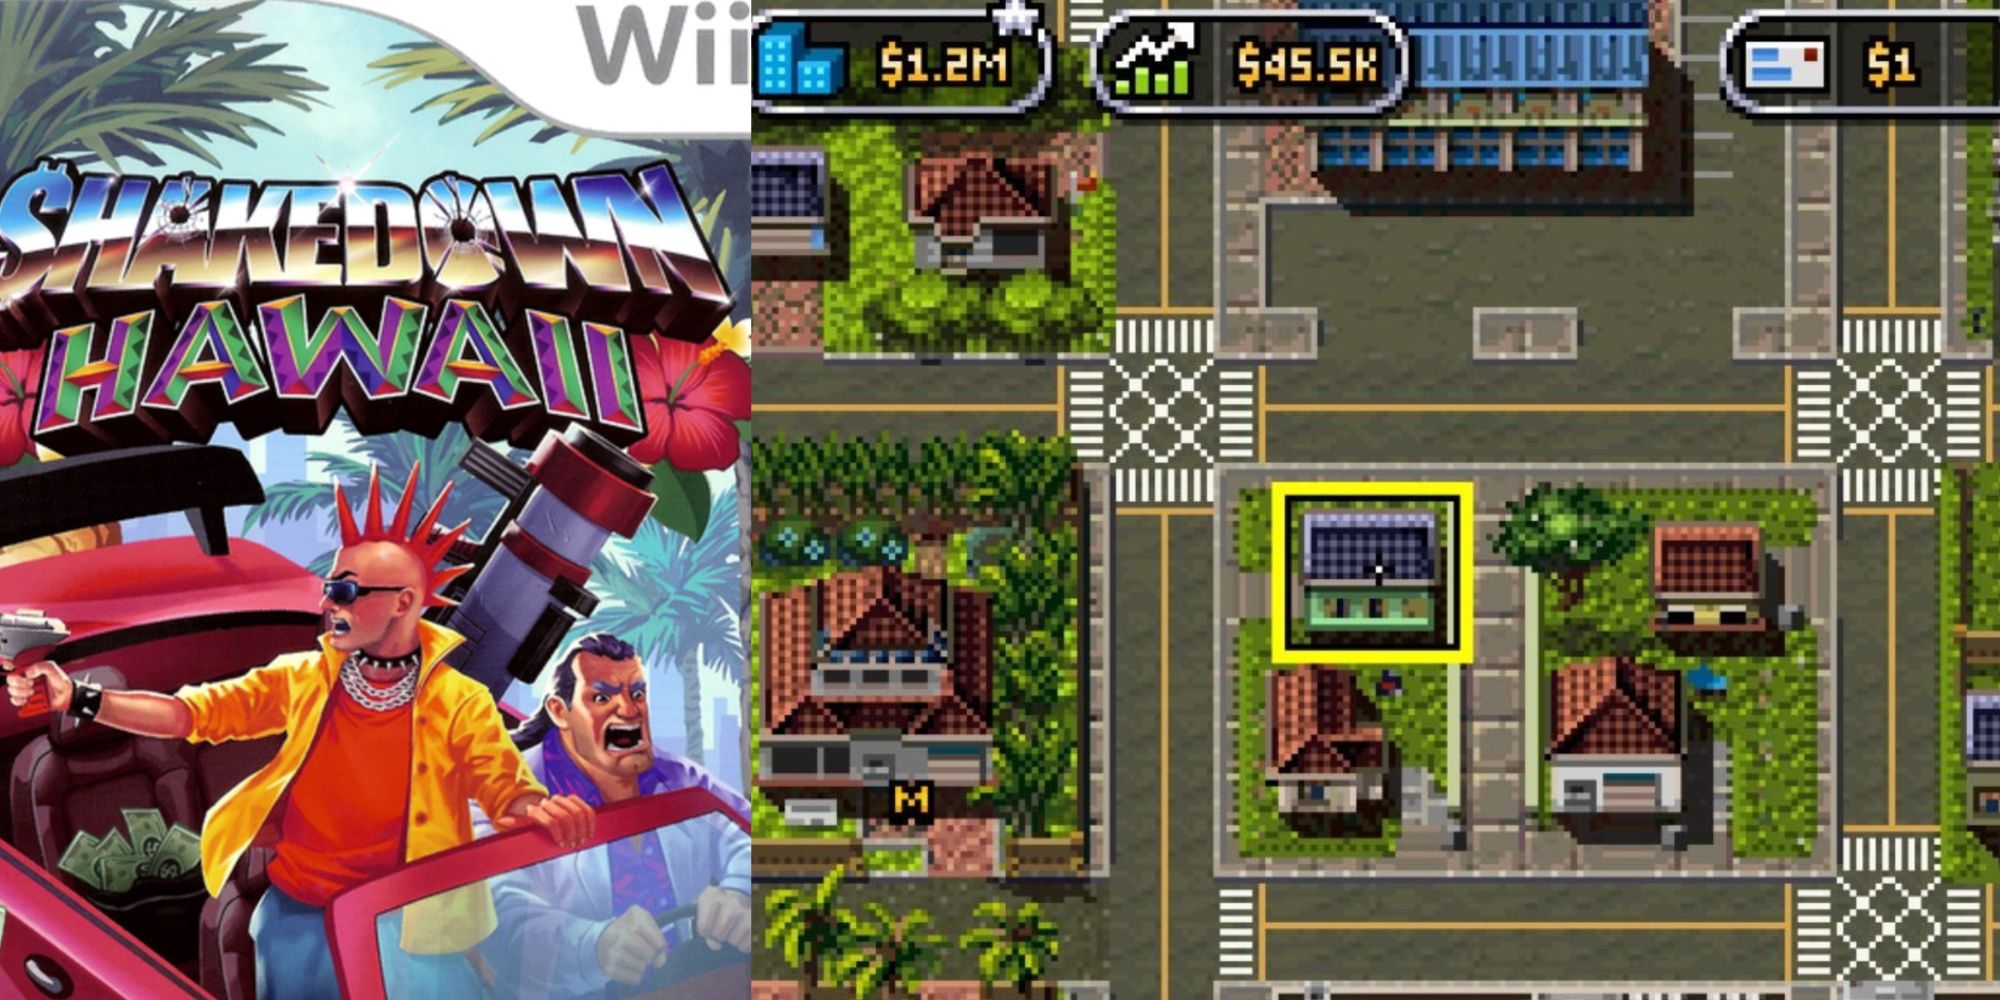 A split-image of the Wii artwork for Shakedown Hawaii and a top-down map of houses and streets with money and growth elements displayed.